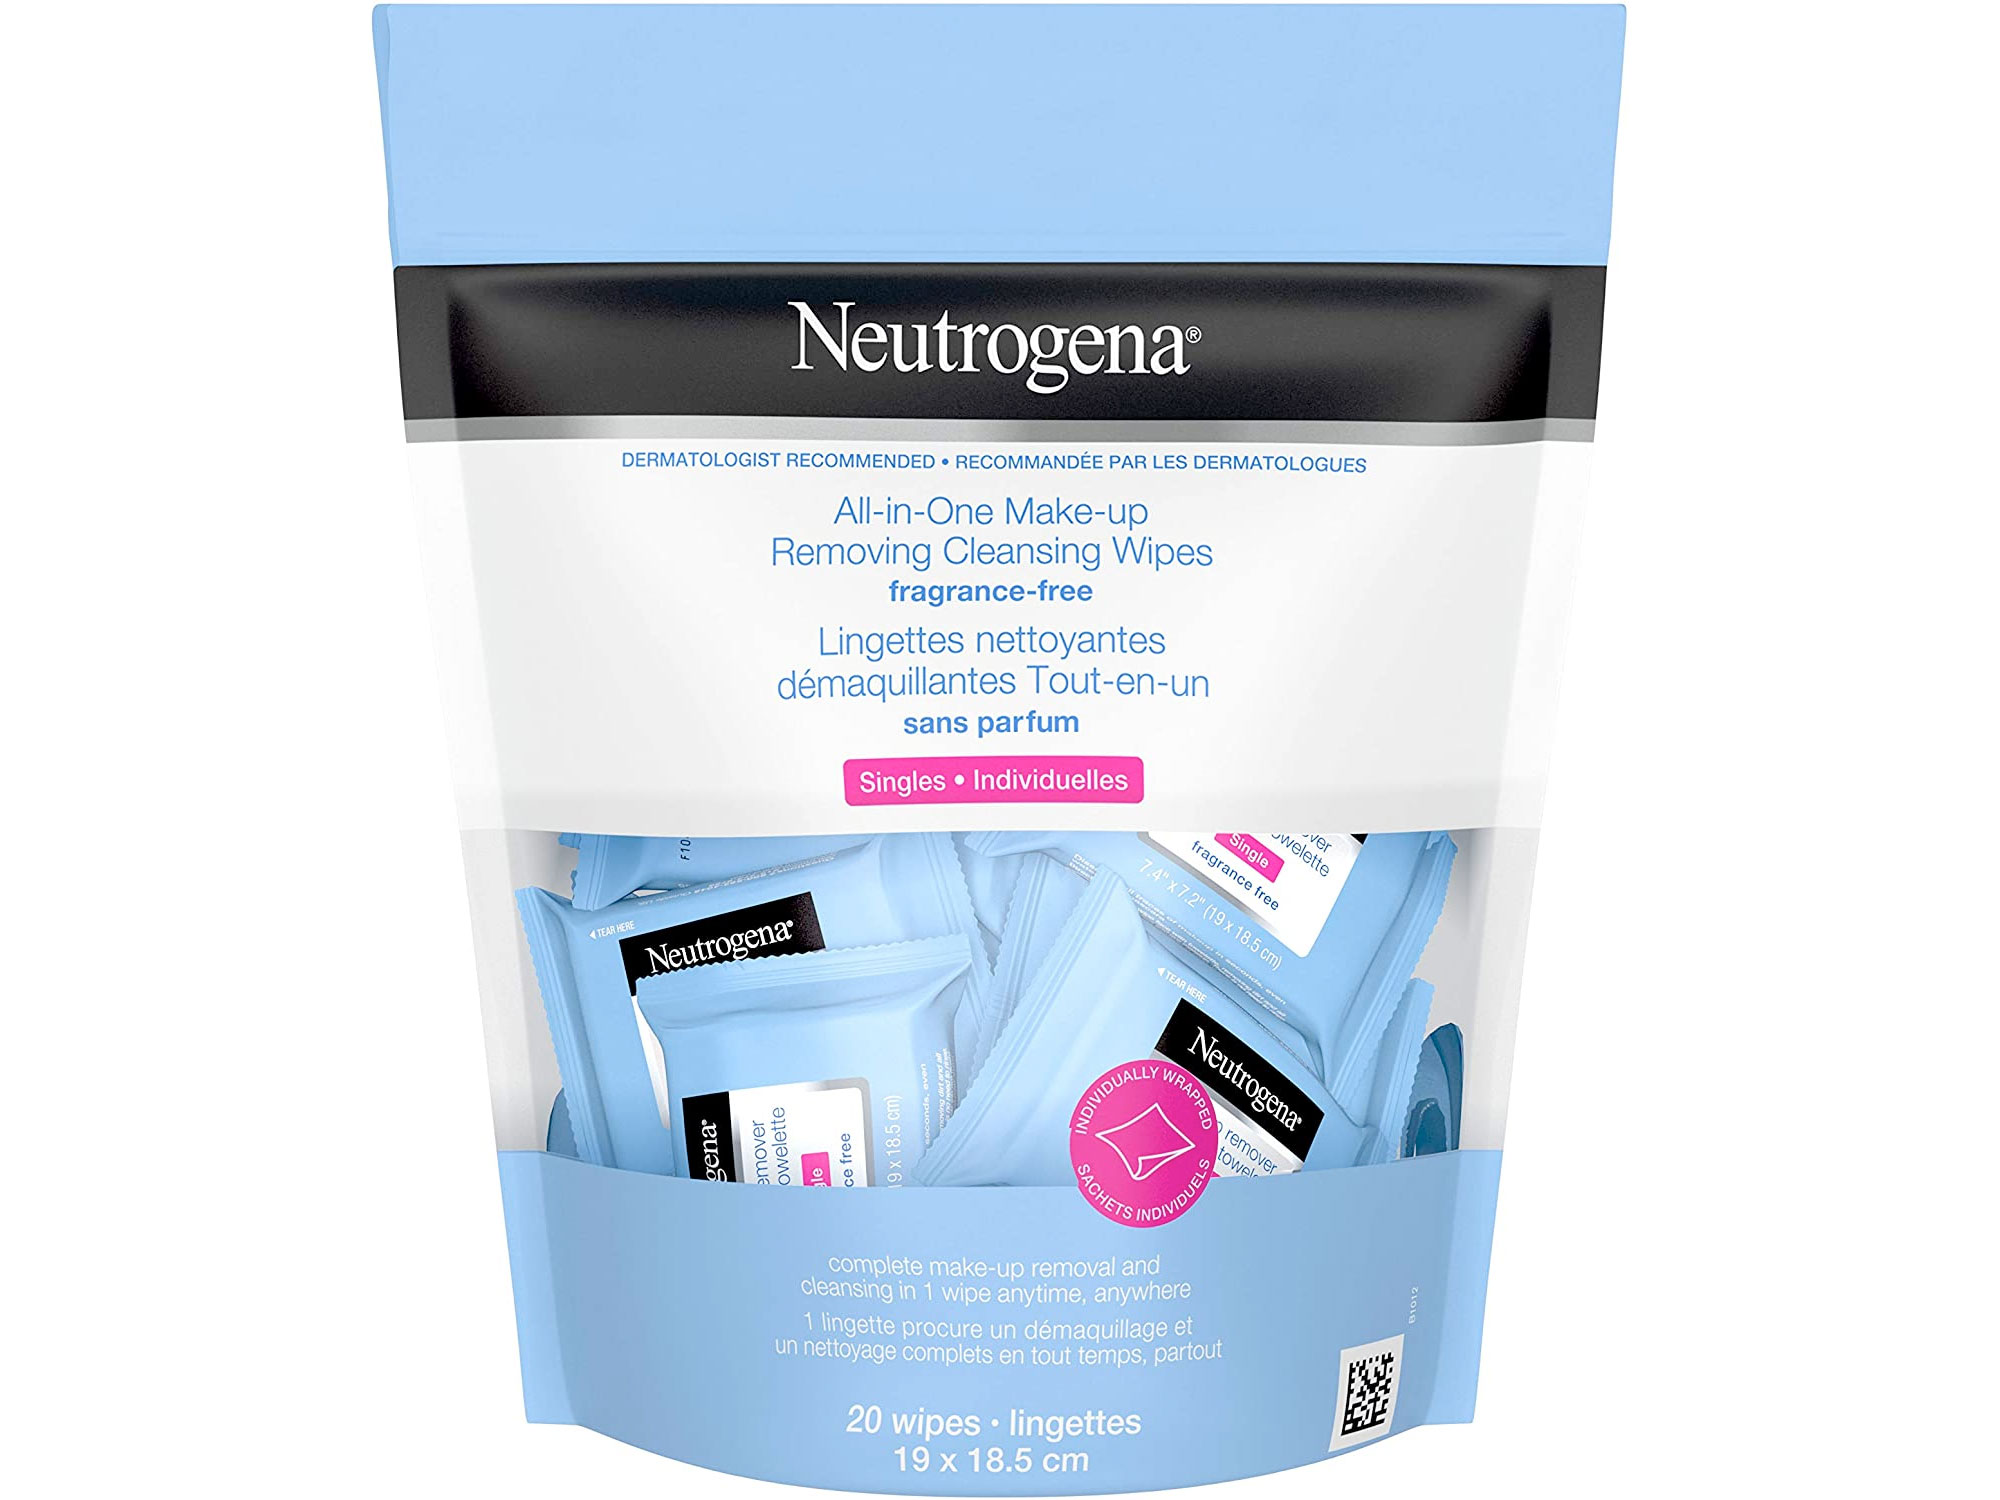 Amazon：Neutrogena Make-up Removing Cleansing wipes (20 Count)只賣$5.97